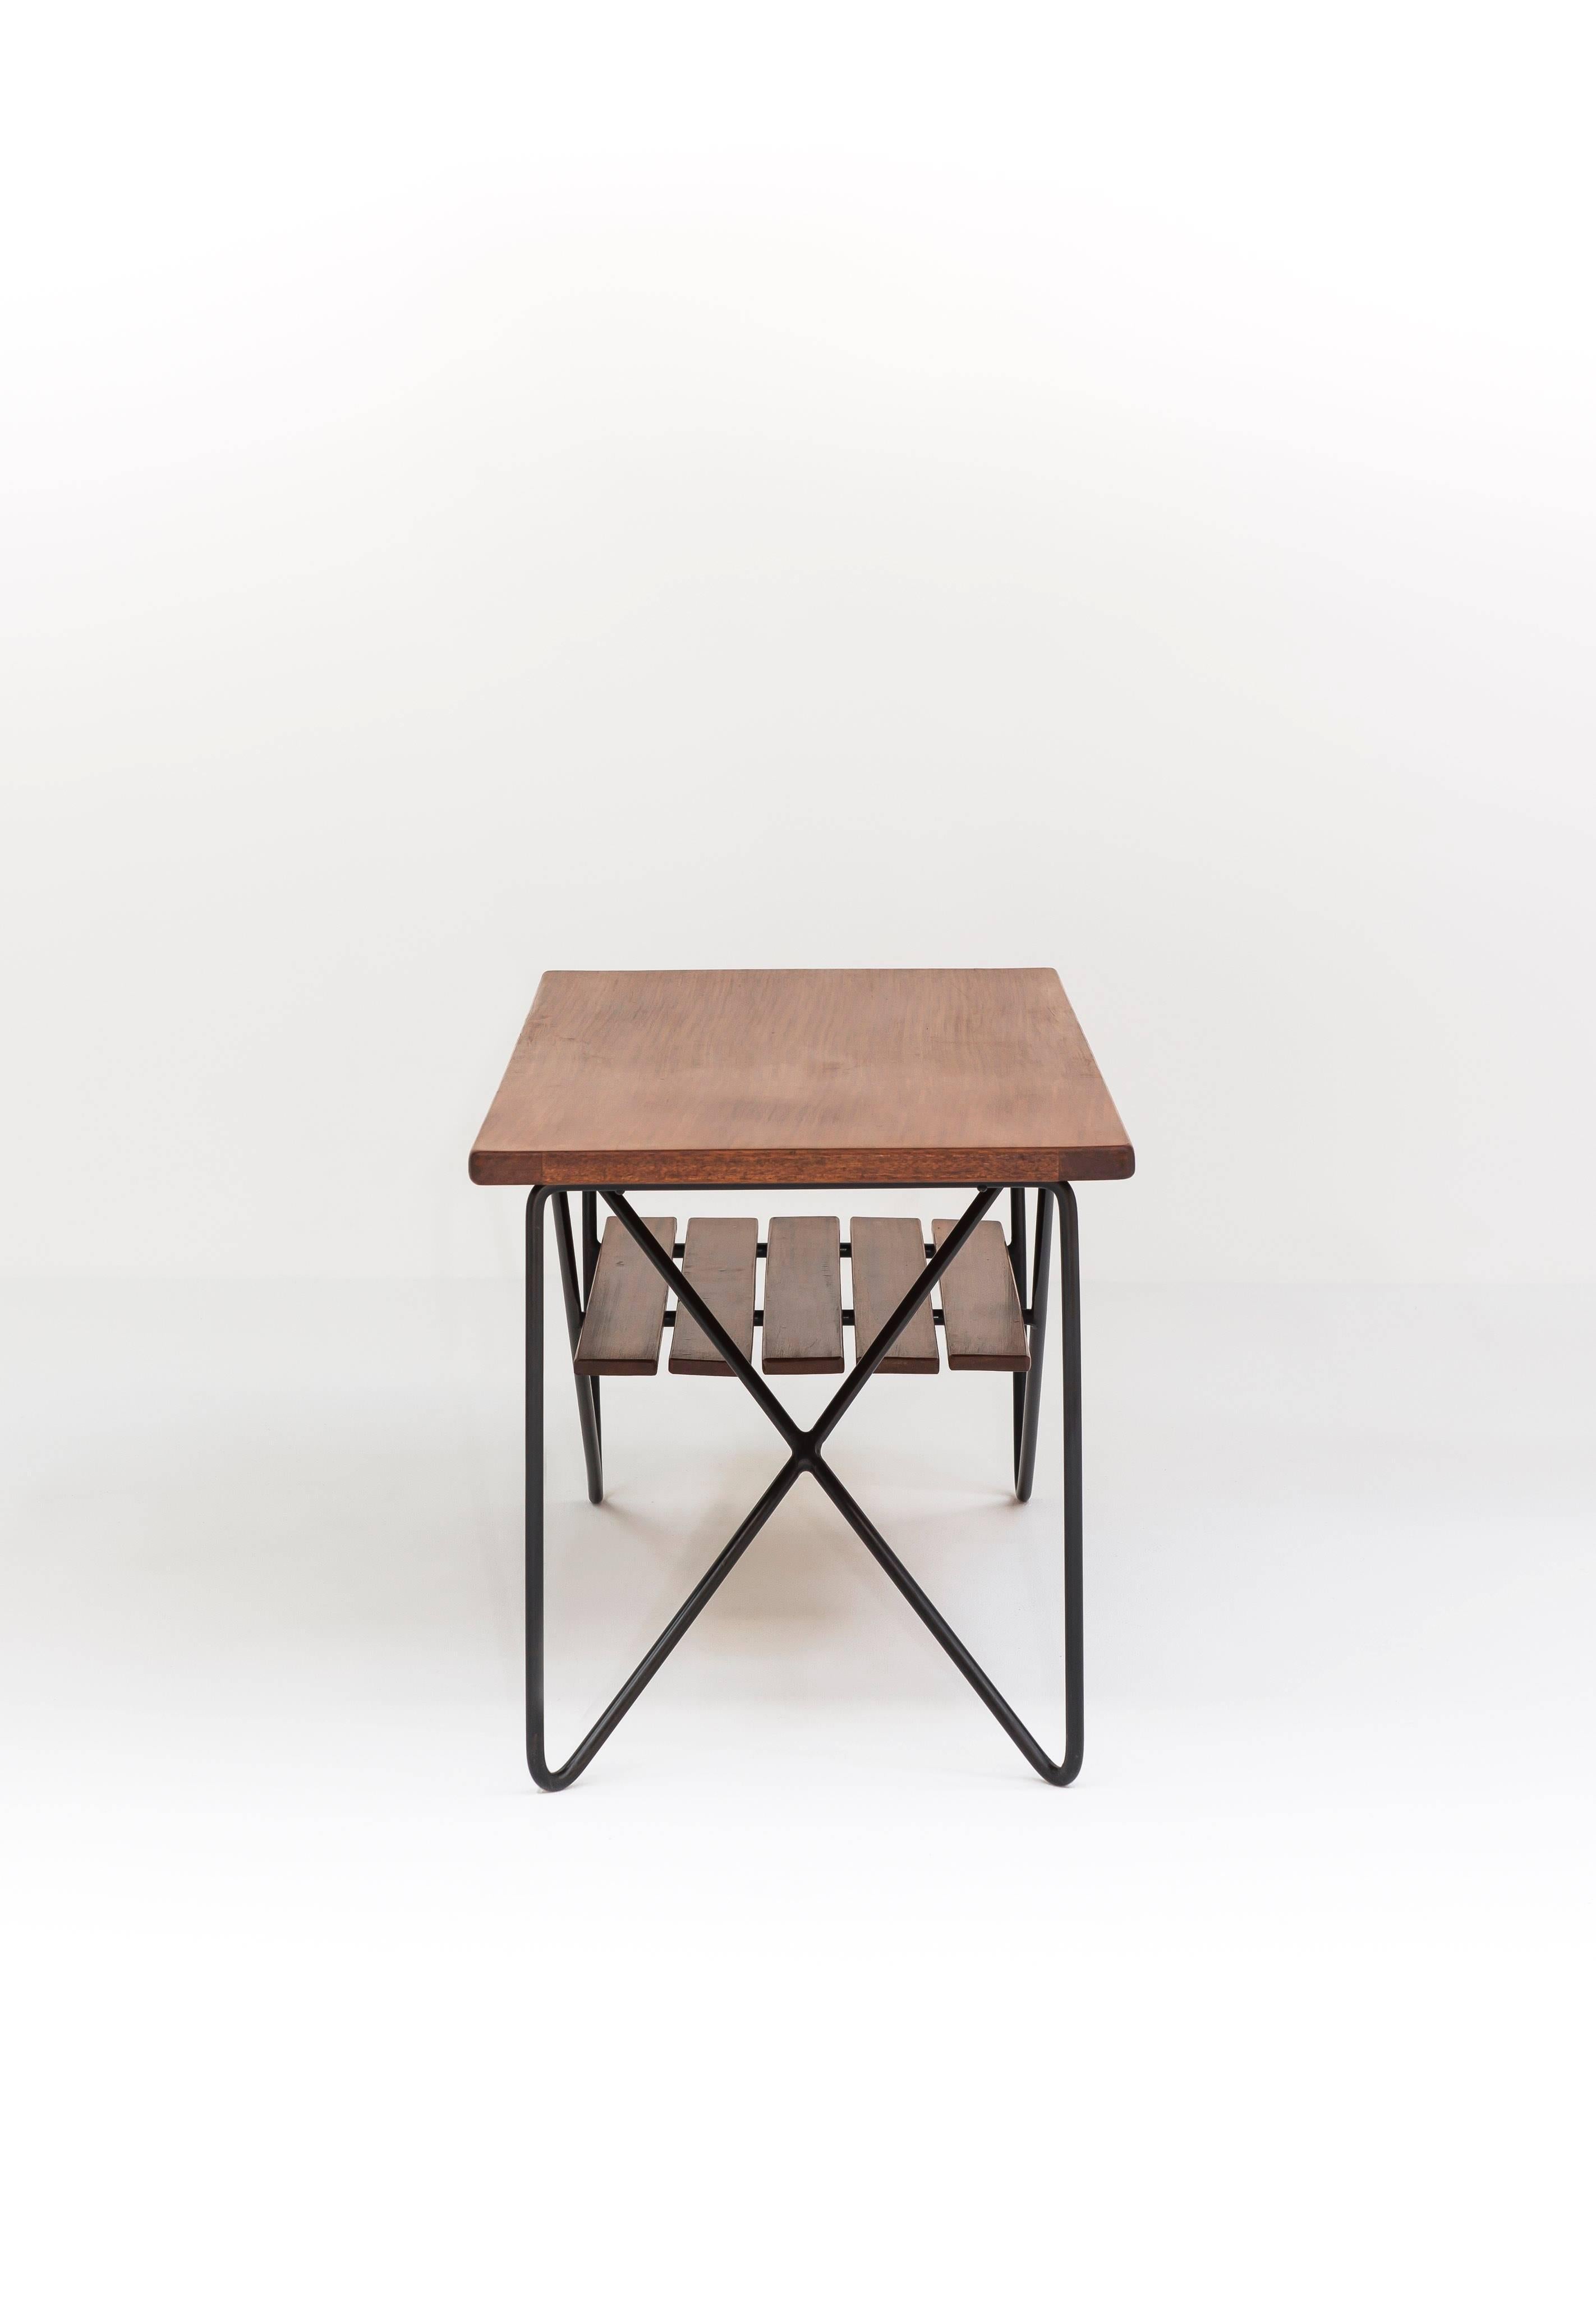 Metal Low Table GC52 by Rene-Jean Caillette, Charron Groupe 4 Edition, 1954 For Sale